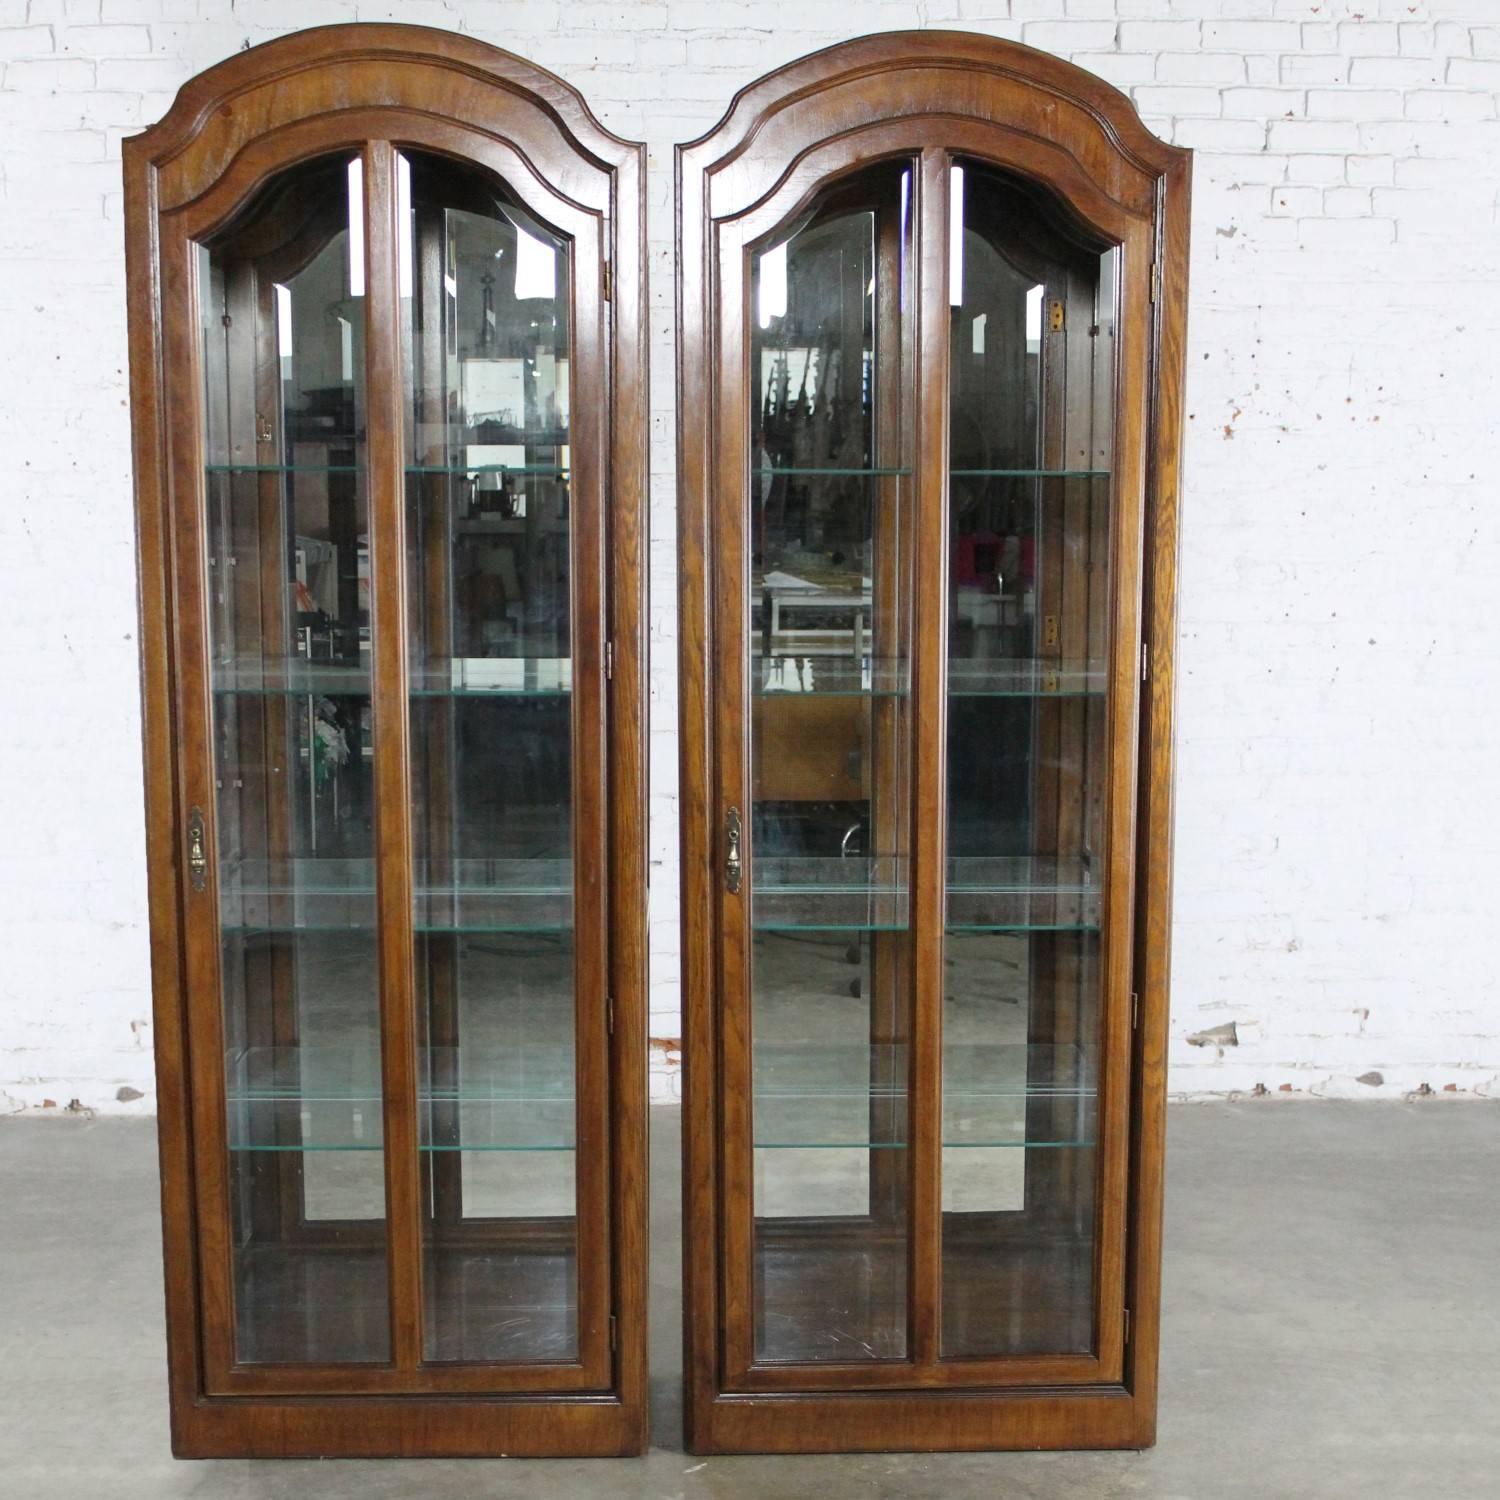 Handsome pair of lighted curio cabinets or vitrines in a beautiful dark wood with arched tops and mirrored inside backs. These cabinets are in wonderful vintage condition, circa 1980s-1990s.

Just what the designer ordered! A pair of interesting